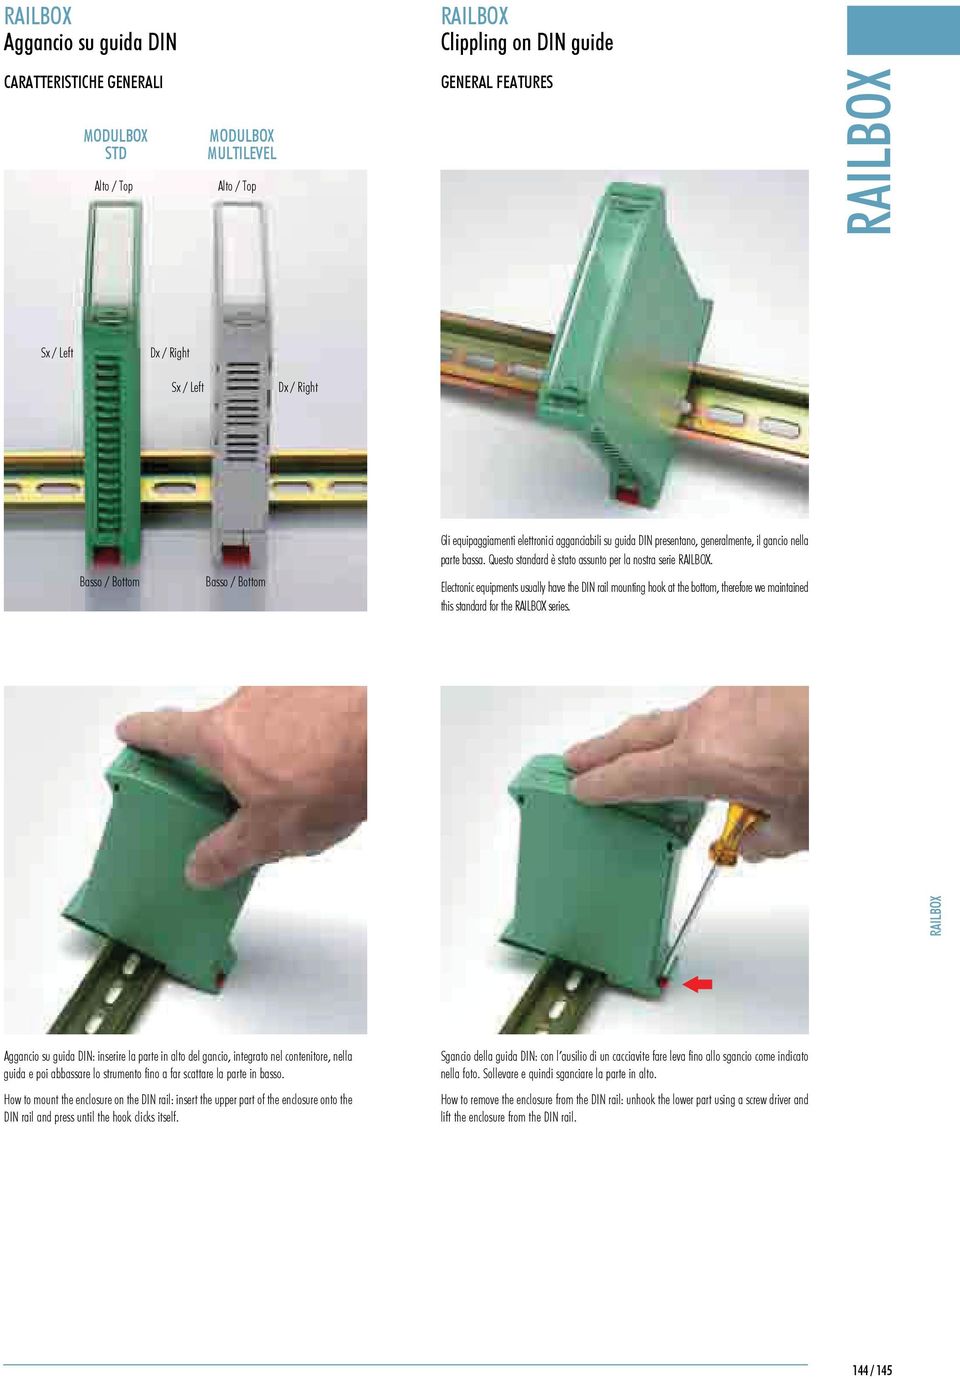 How to mount the enclosure on the DIN rail: insert the upper part of the enclosure onto the DIN rail and press until the hook clicks itself.